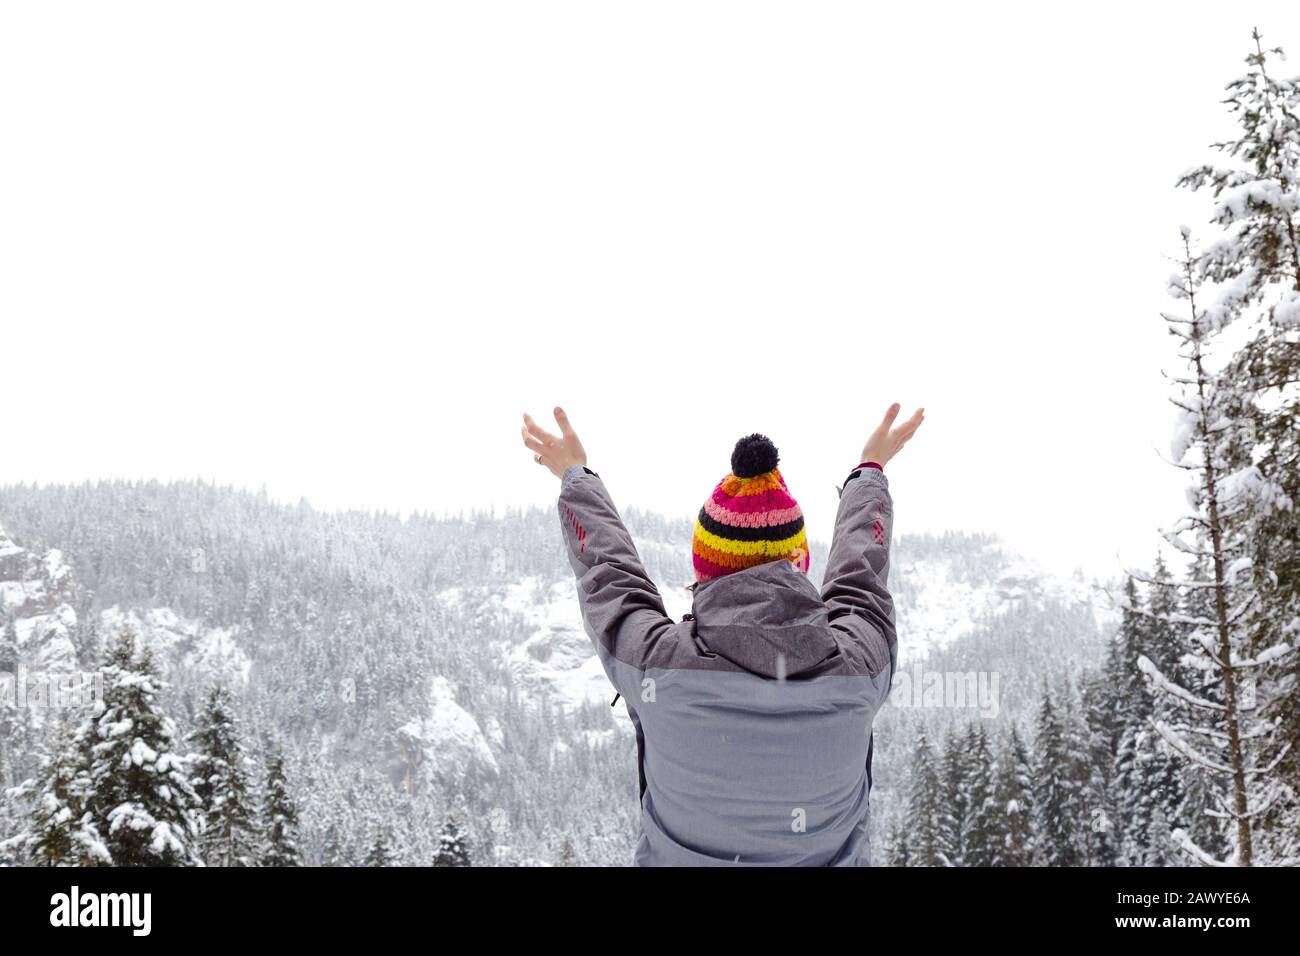 Young female with hands raised towards the sky on winter snowy day. Freedom concept. Place for text. Stock Photo